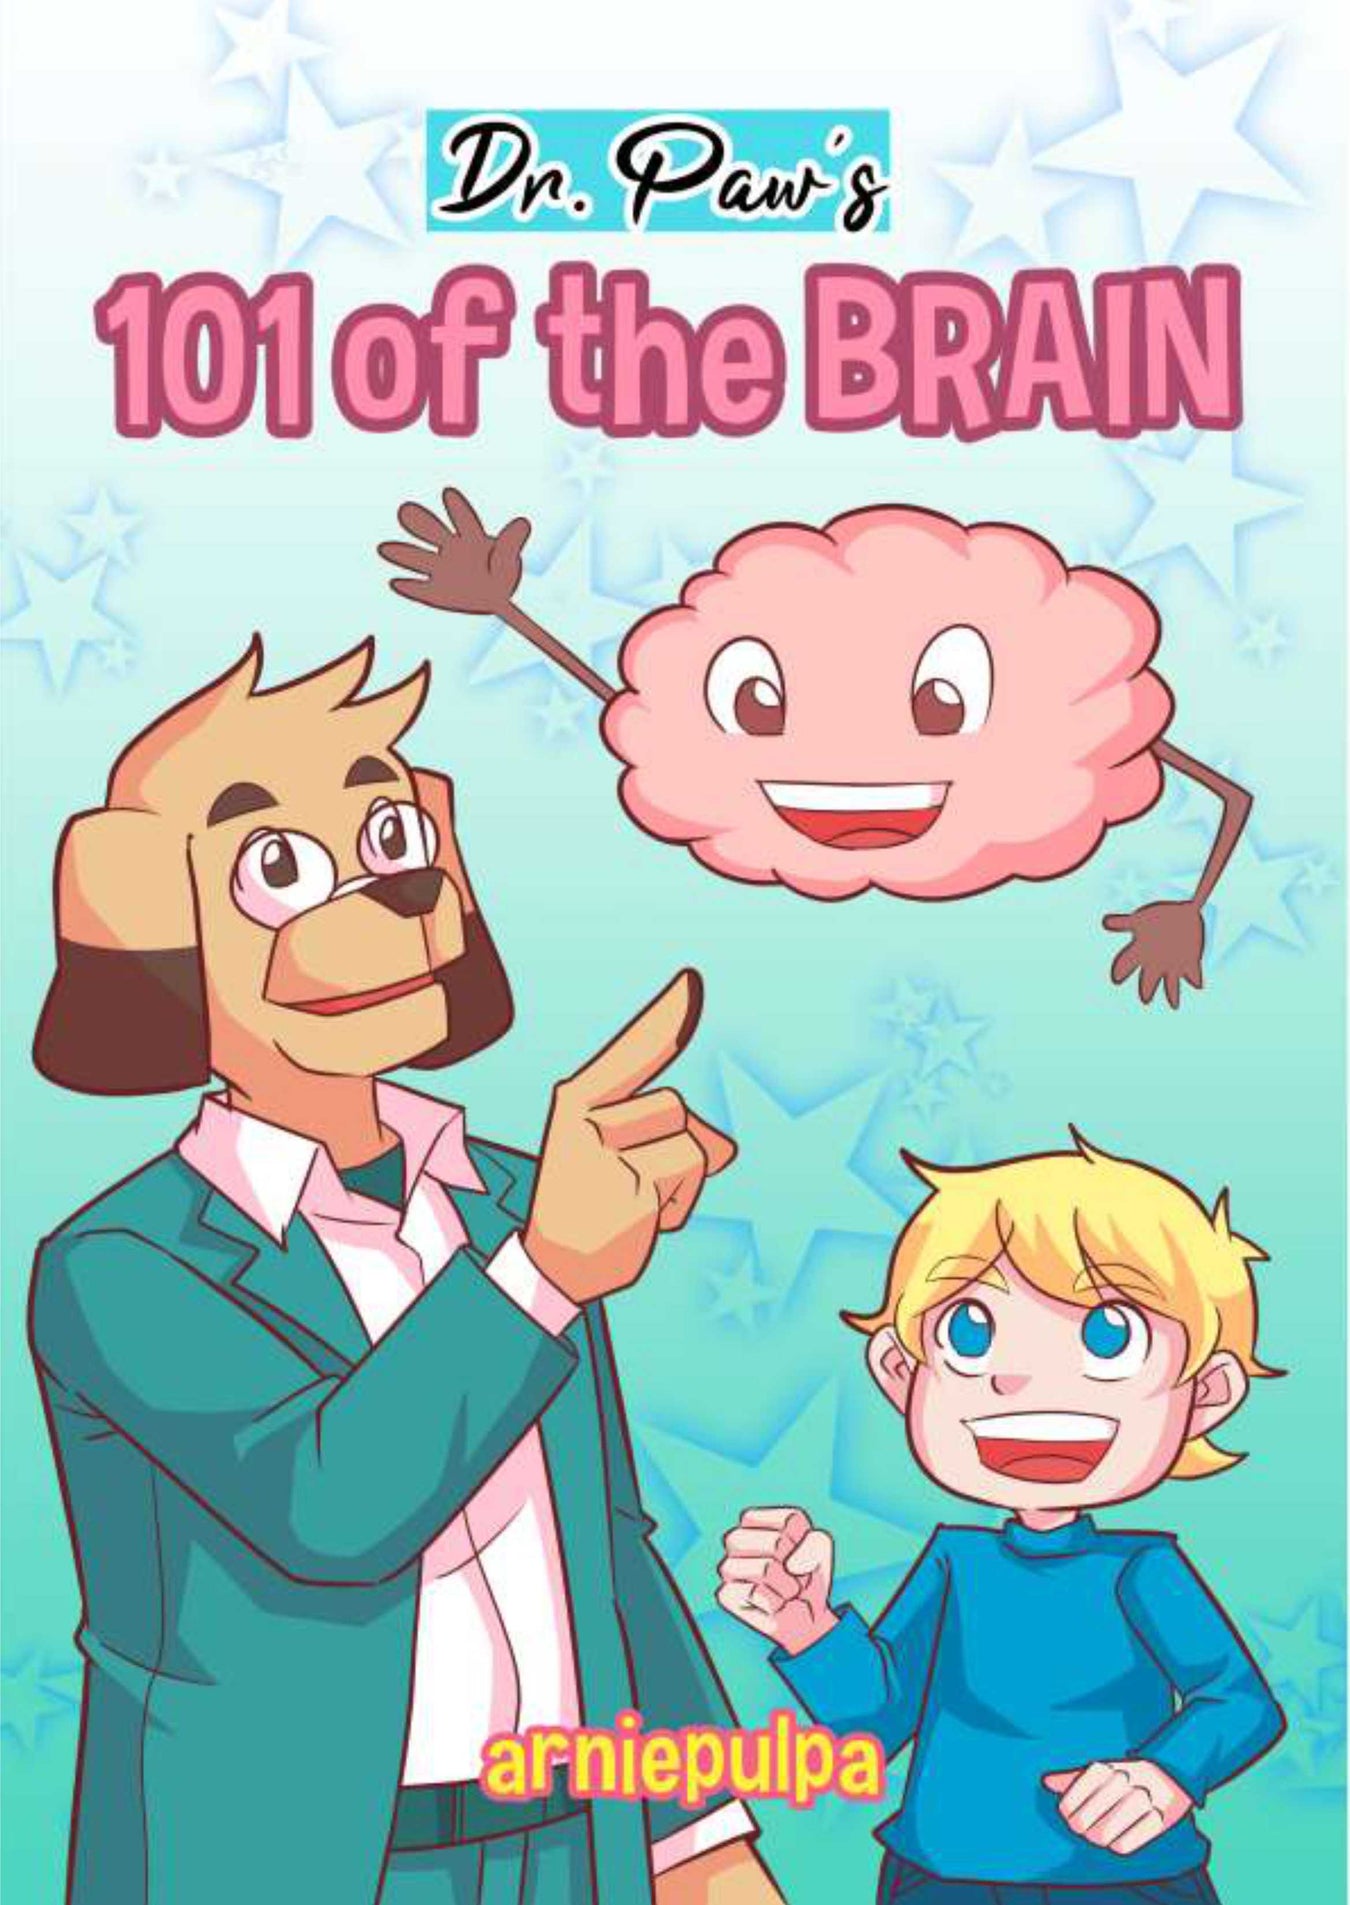 Coming Soon Dr. Paw’s The Brain 101